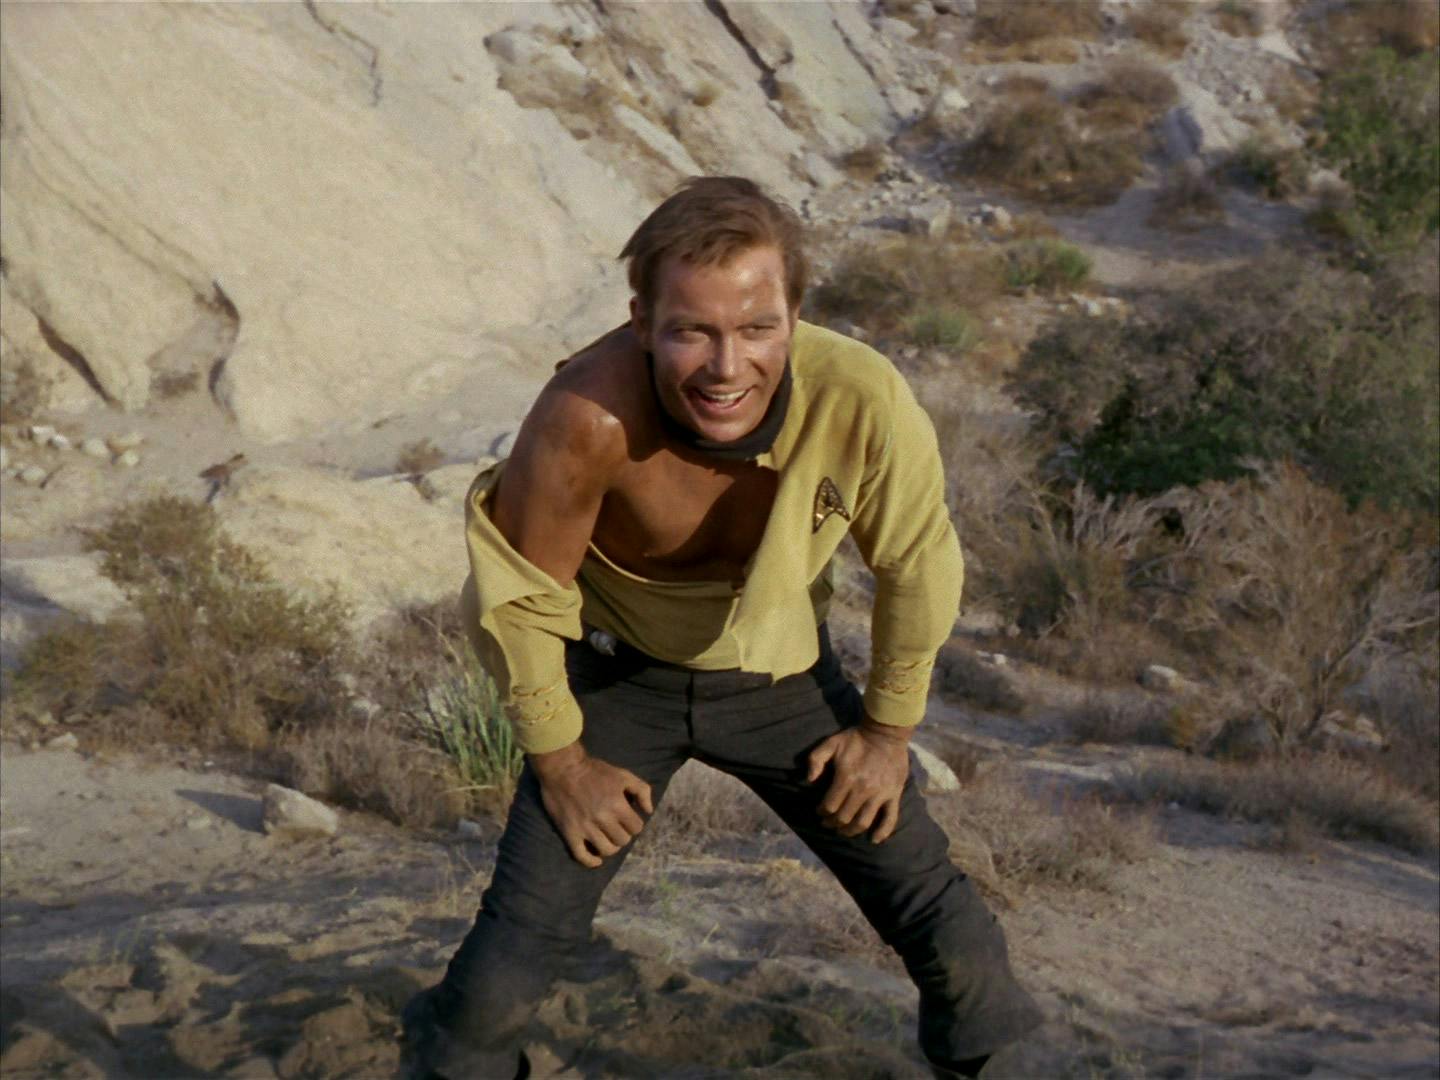 Kirk leans over as his shirt uniform is torn in 'Shore Leave'